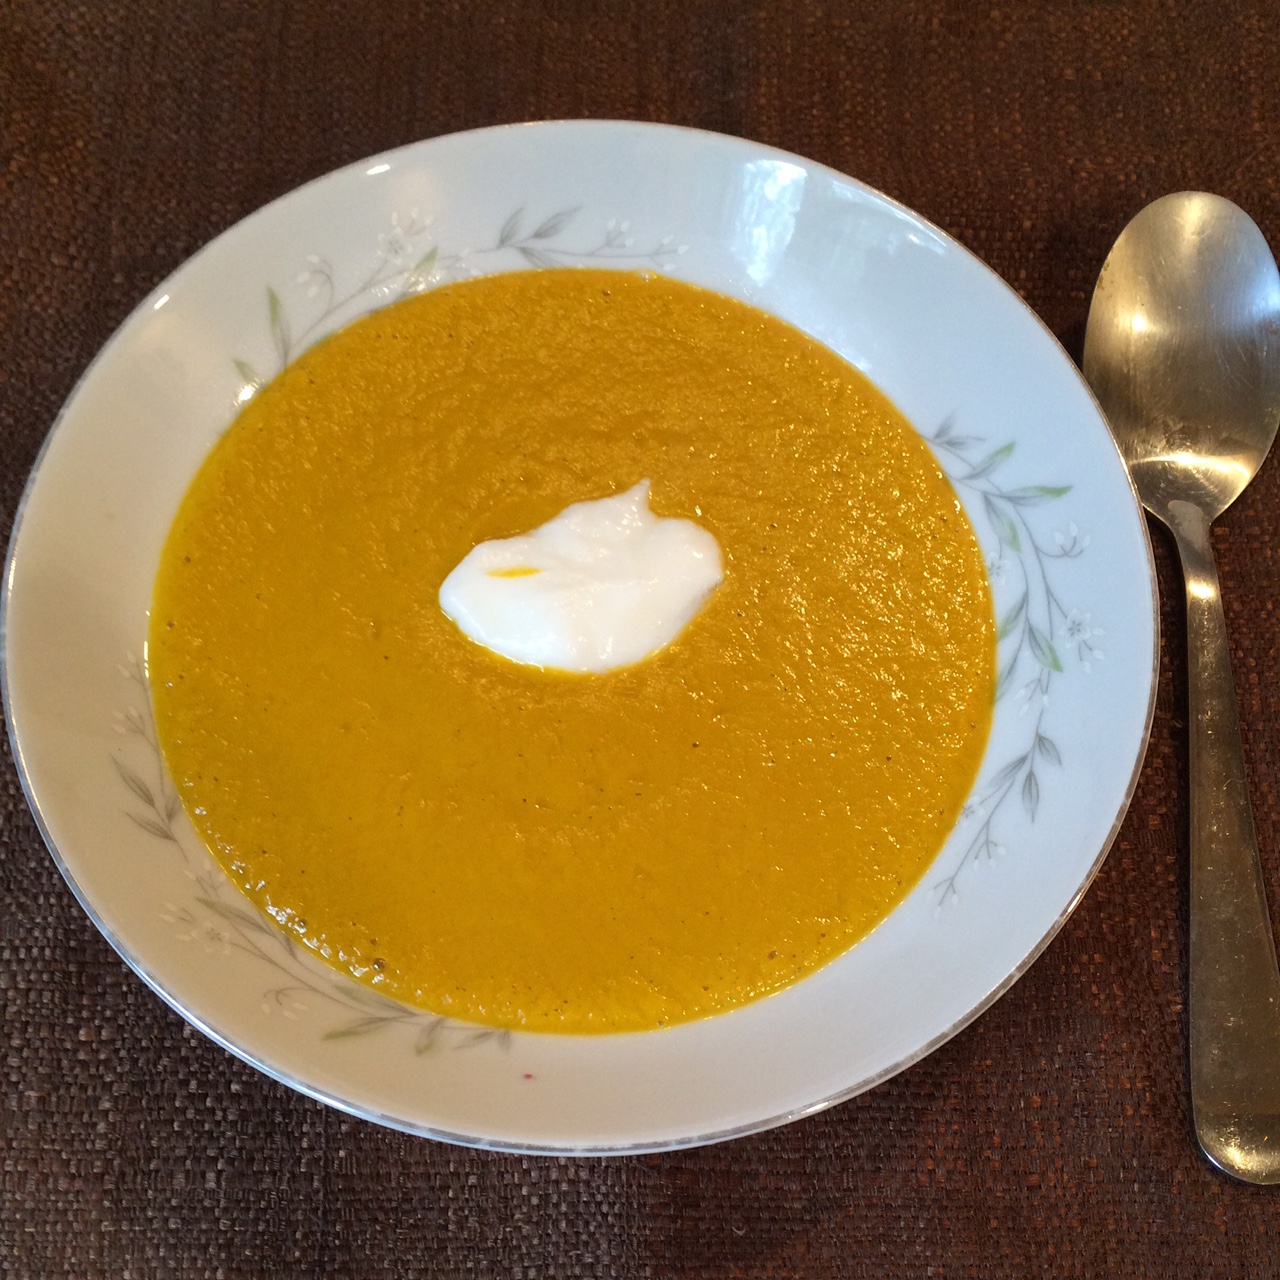 Low profile white china bowl with a deep orange soup and small dollop of white goat yoghurt in the center, silver spoon on the side, centered on a brown fabric background.